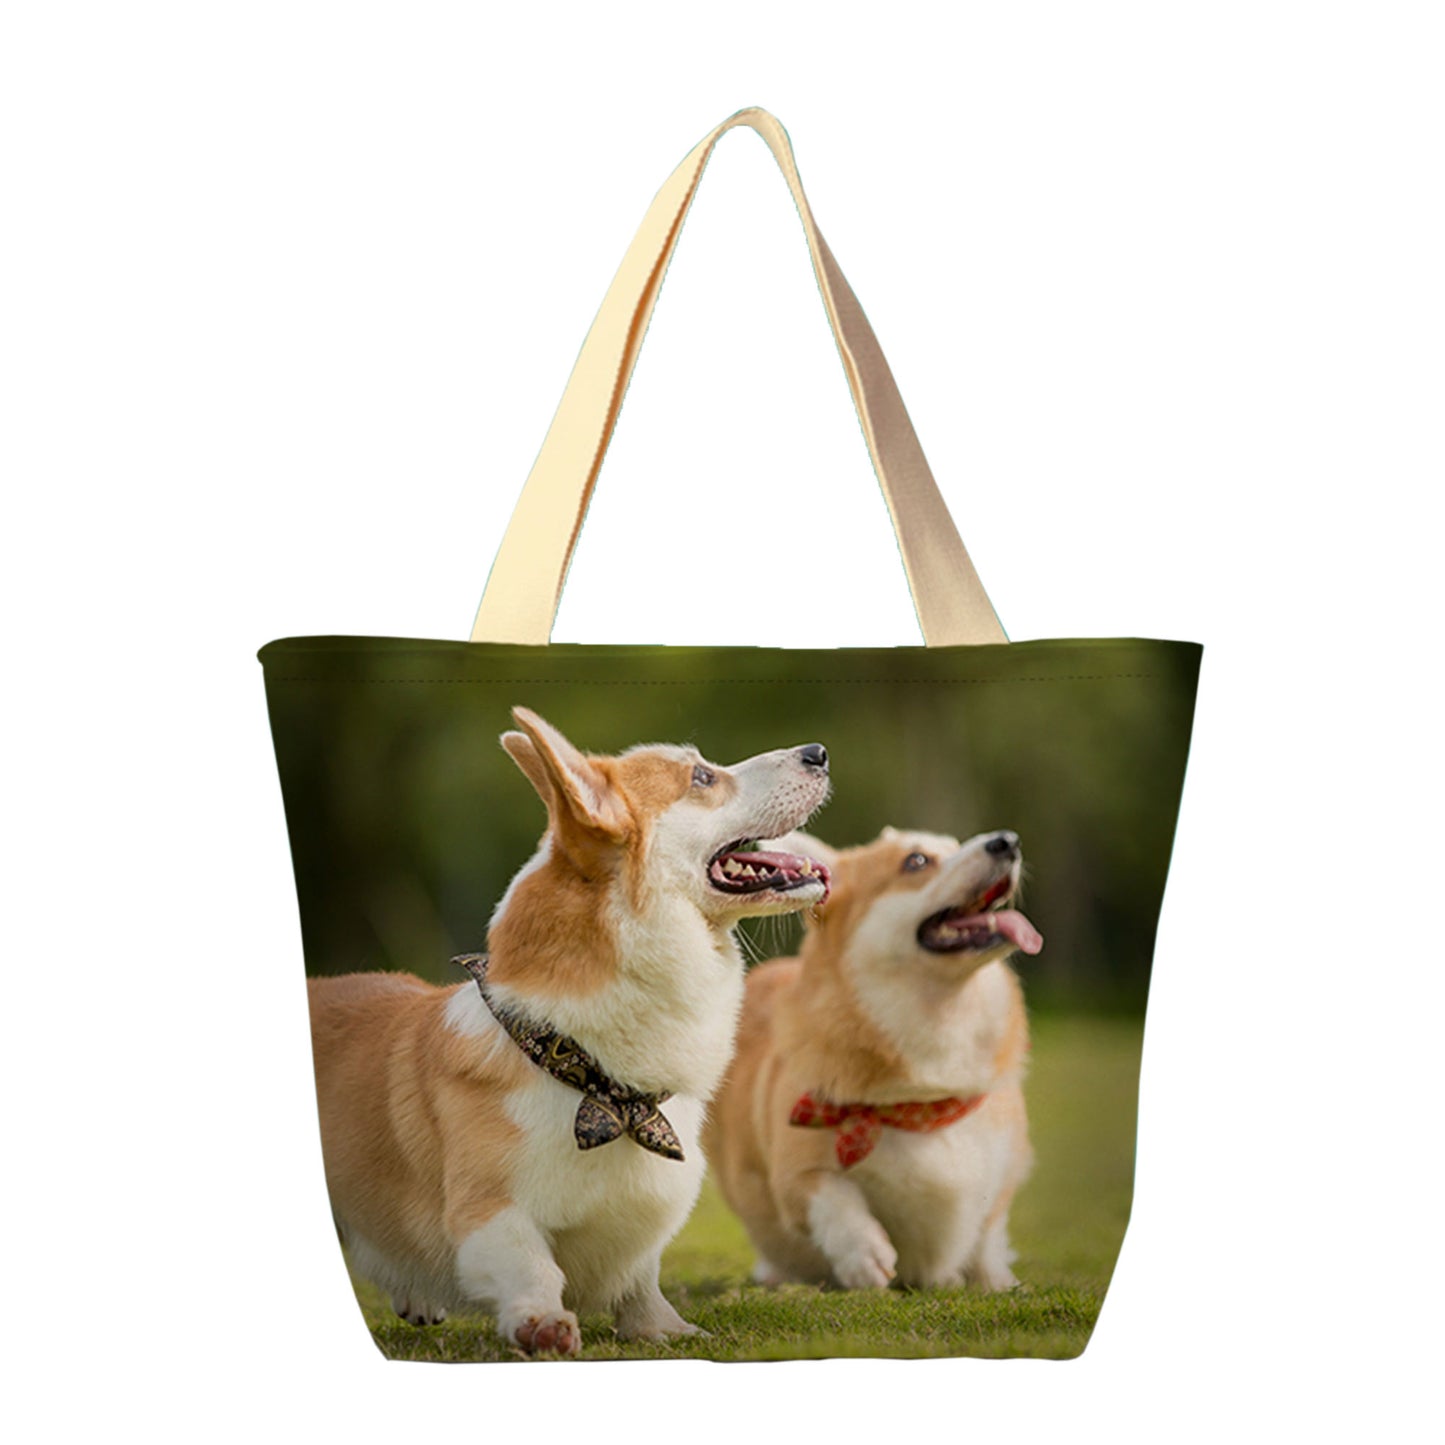 A all over print  tote bag with a photo of two dogs on grassland is a thoughtful and unique gift. The bag is large and the photo is vibrant, making it a conversation starter.